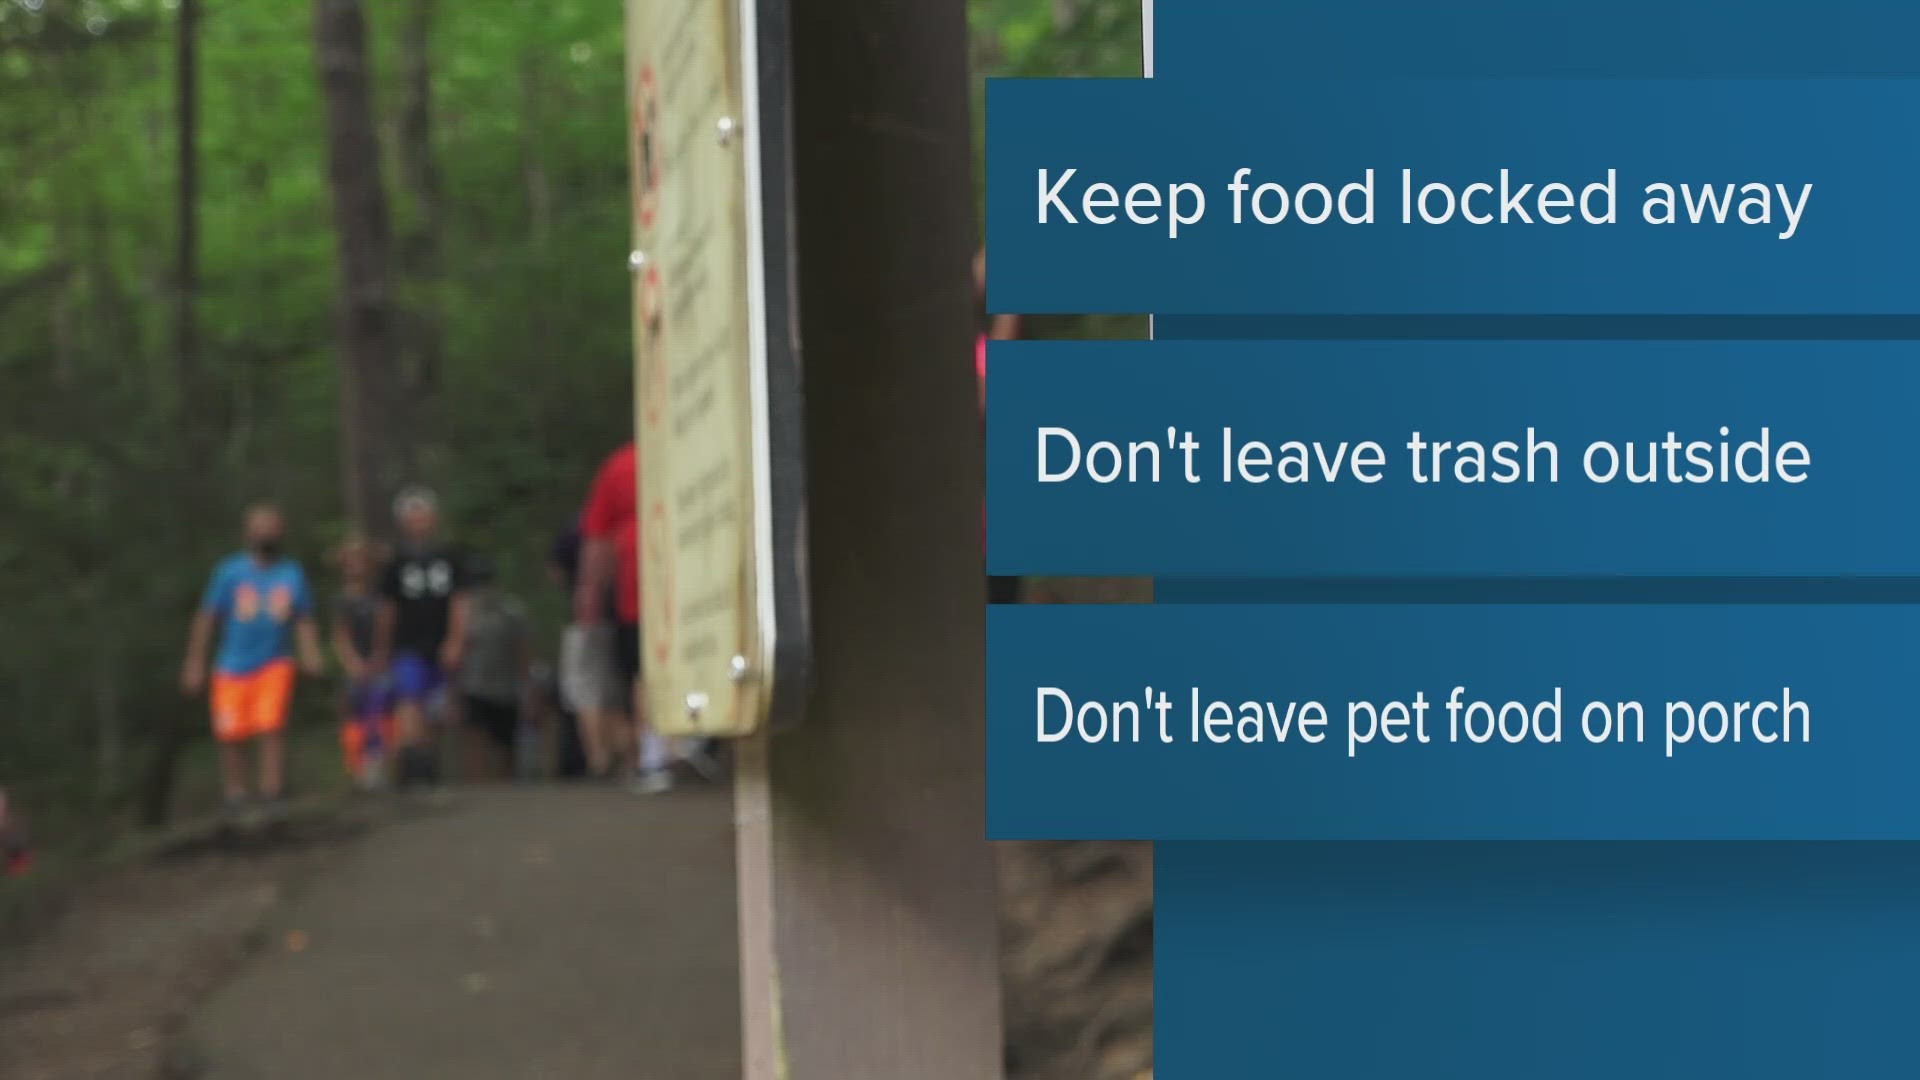 The Cherokee National Forest is reminding visitors to keep food out of the park, to avoid dangerous run-ins with bears.